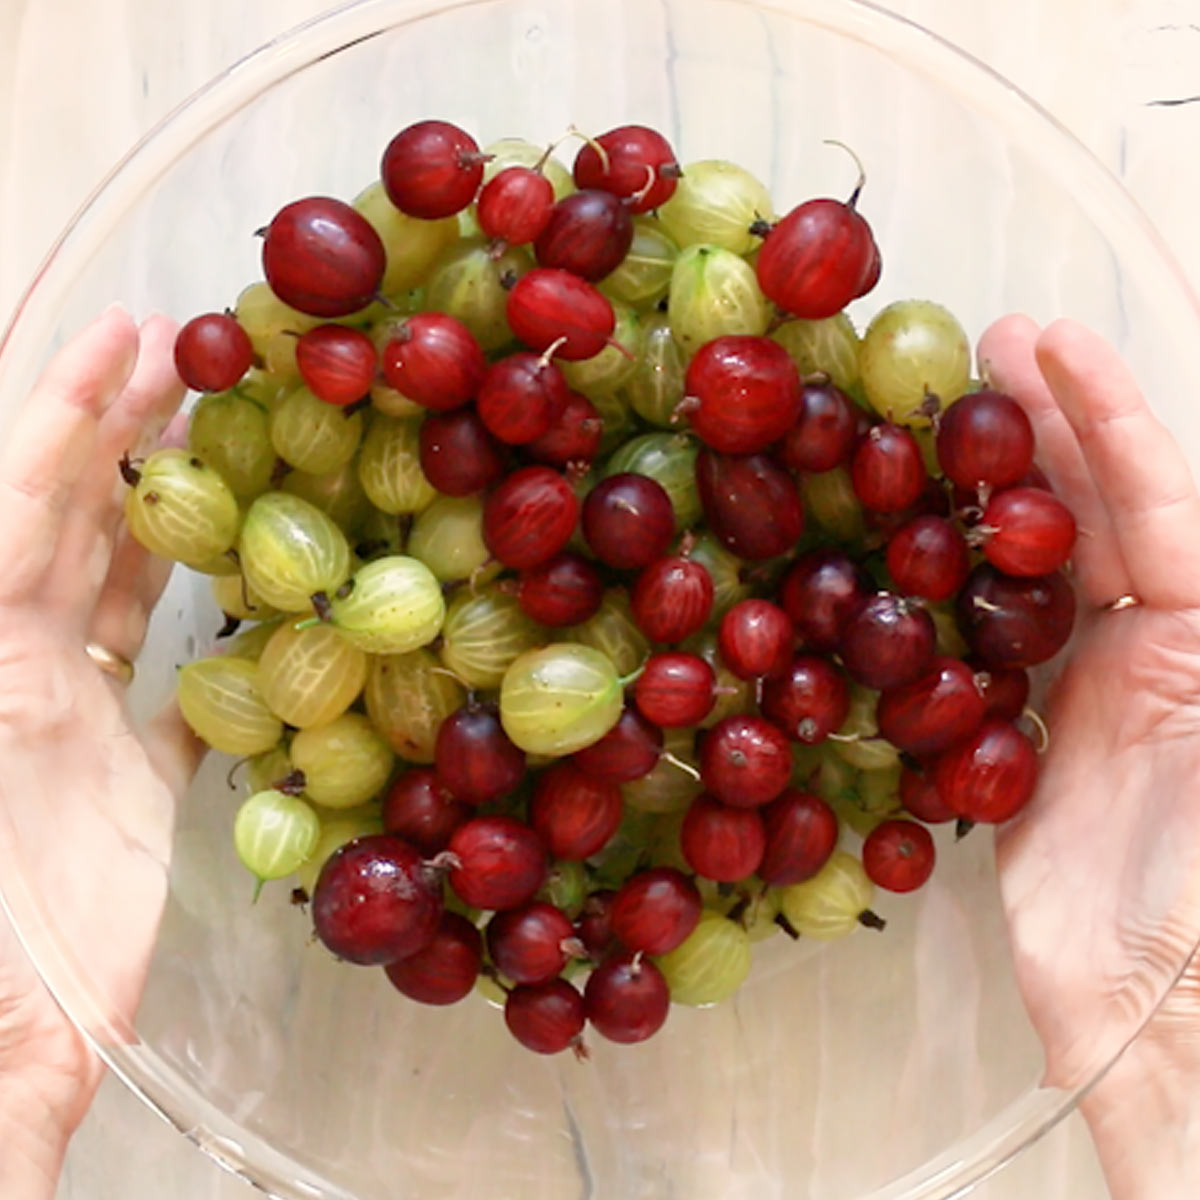 clean fresh red and green gooseberries in a bowl